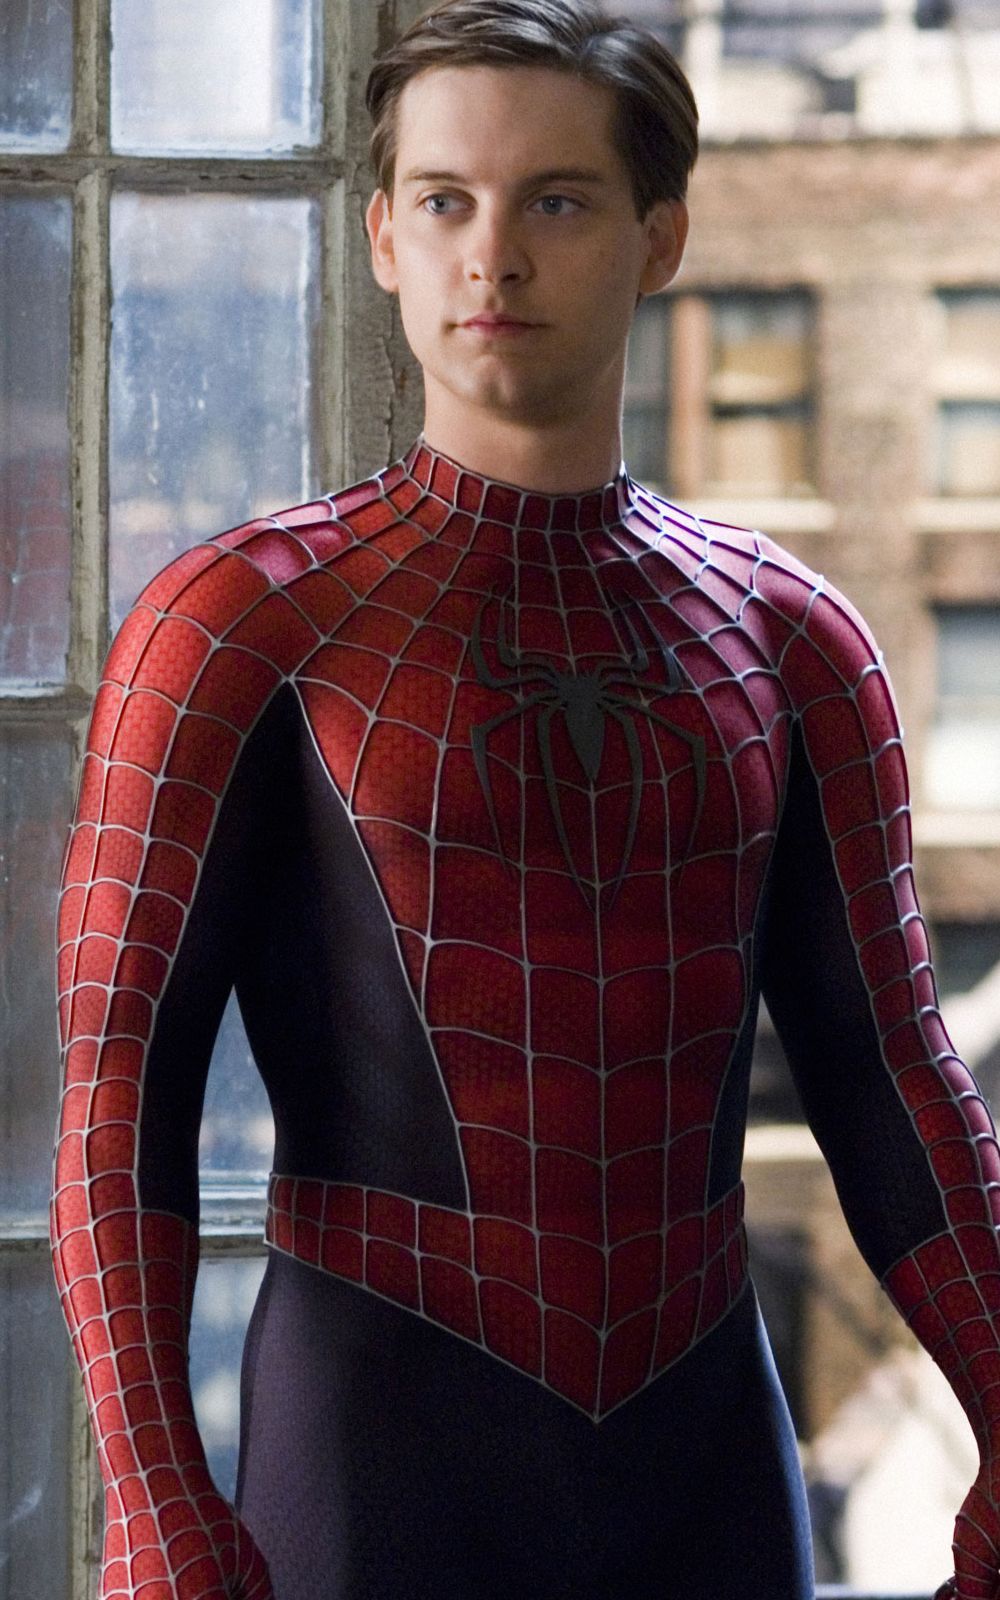 Tobey Maguire as Unmasked Spider-Man 10-16